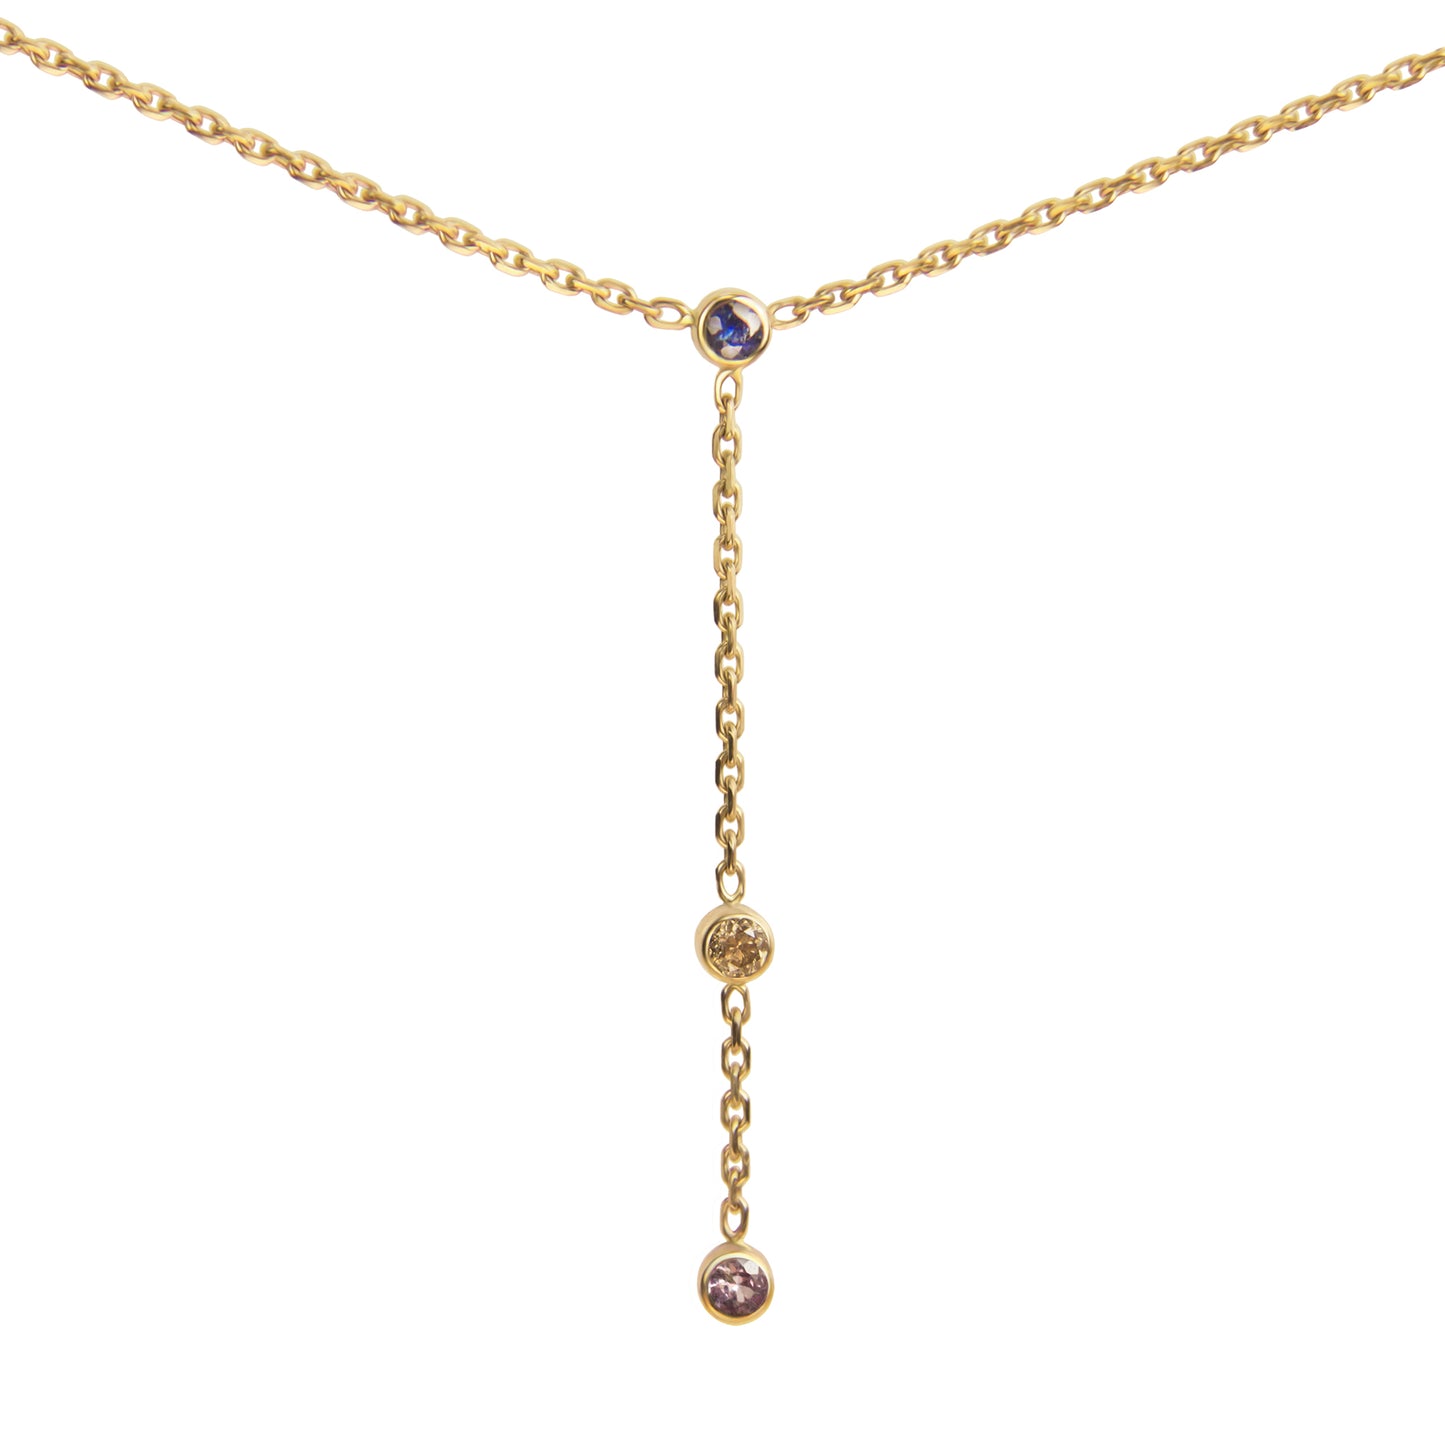 DEWY DROP NECKLACE - CHAMPAGNE DIAMOND, BLUE AND PINK SAPPHIRE - Irena Chmura Jewellery